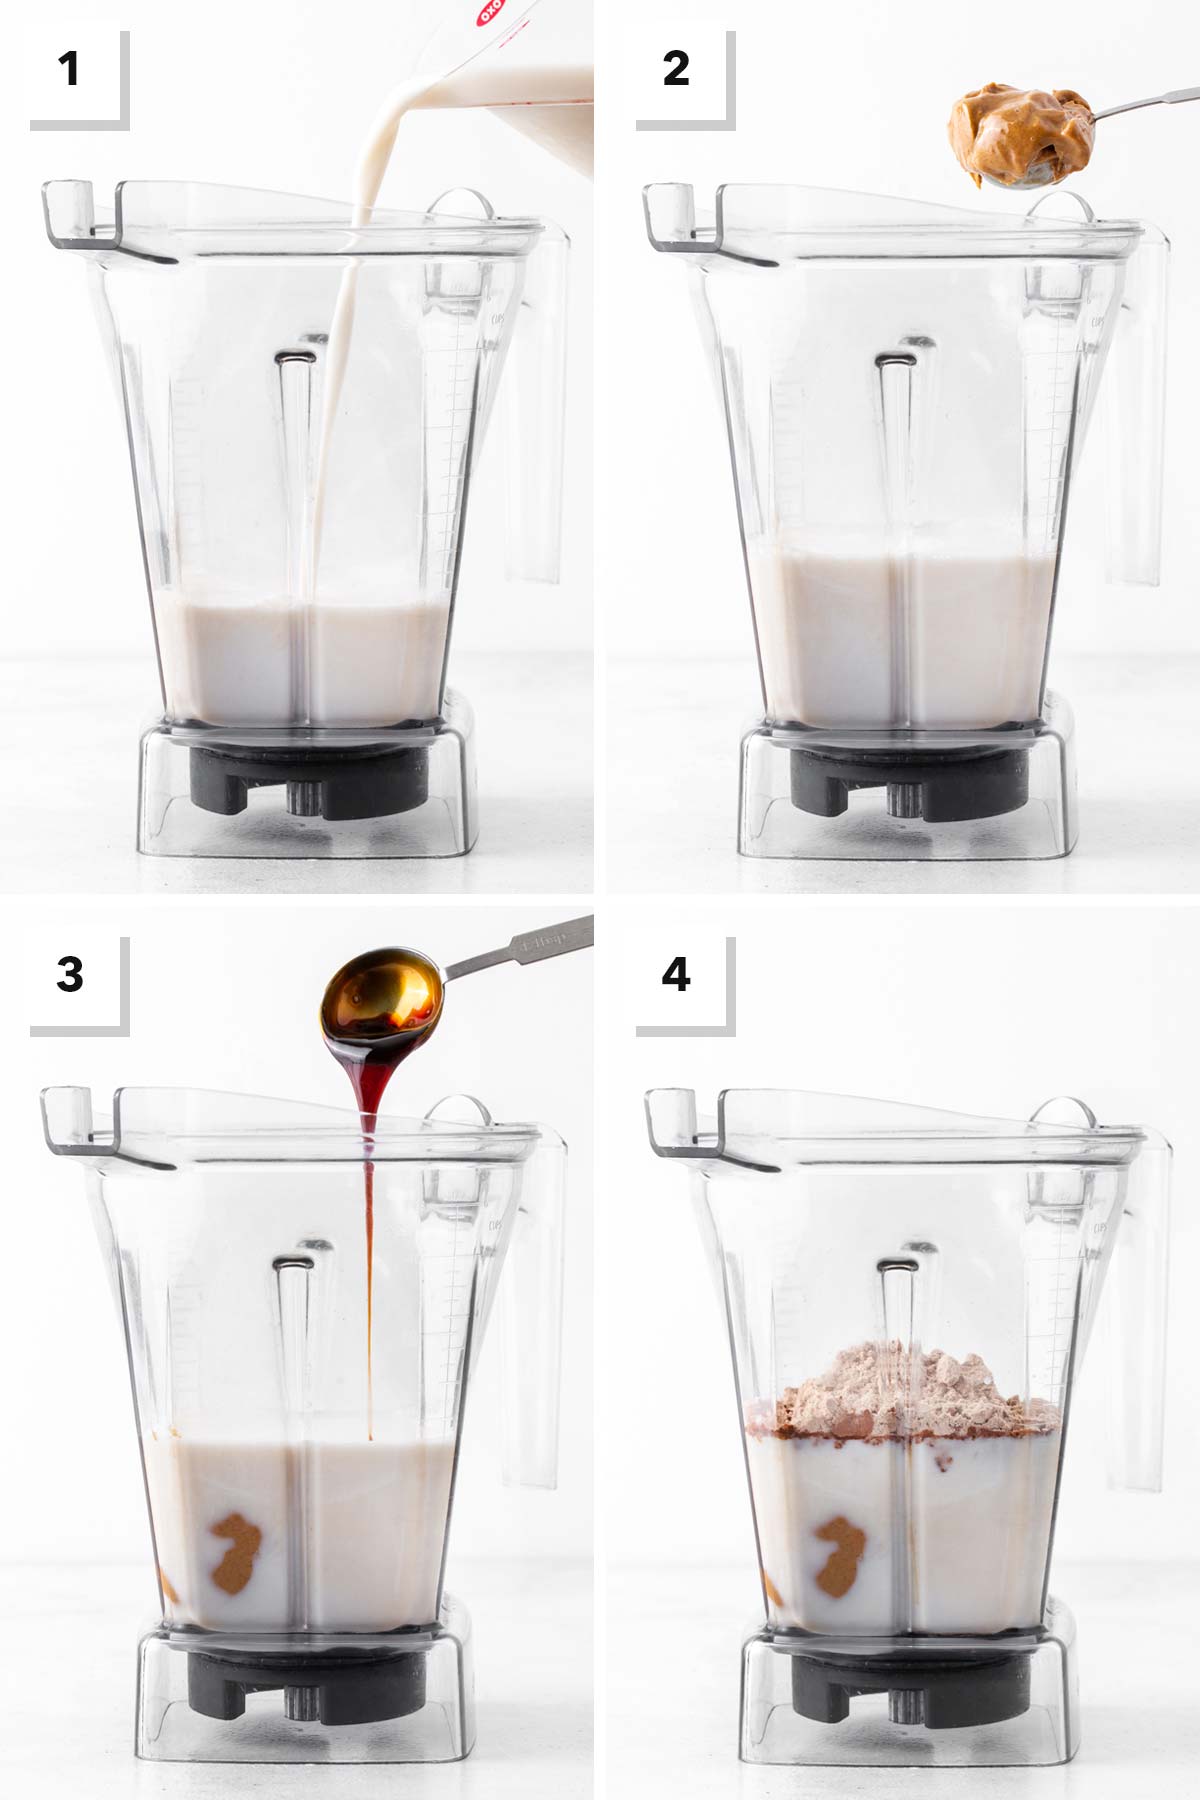 Steps for making a chocolate almond protein shake.